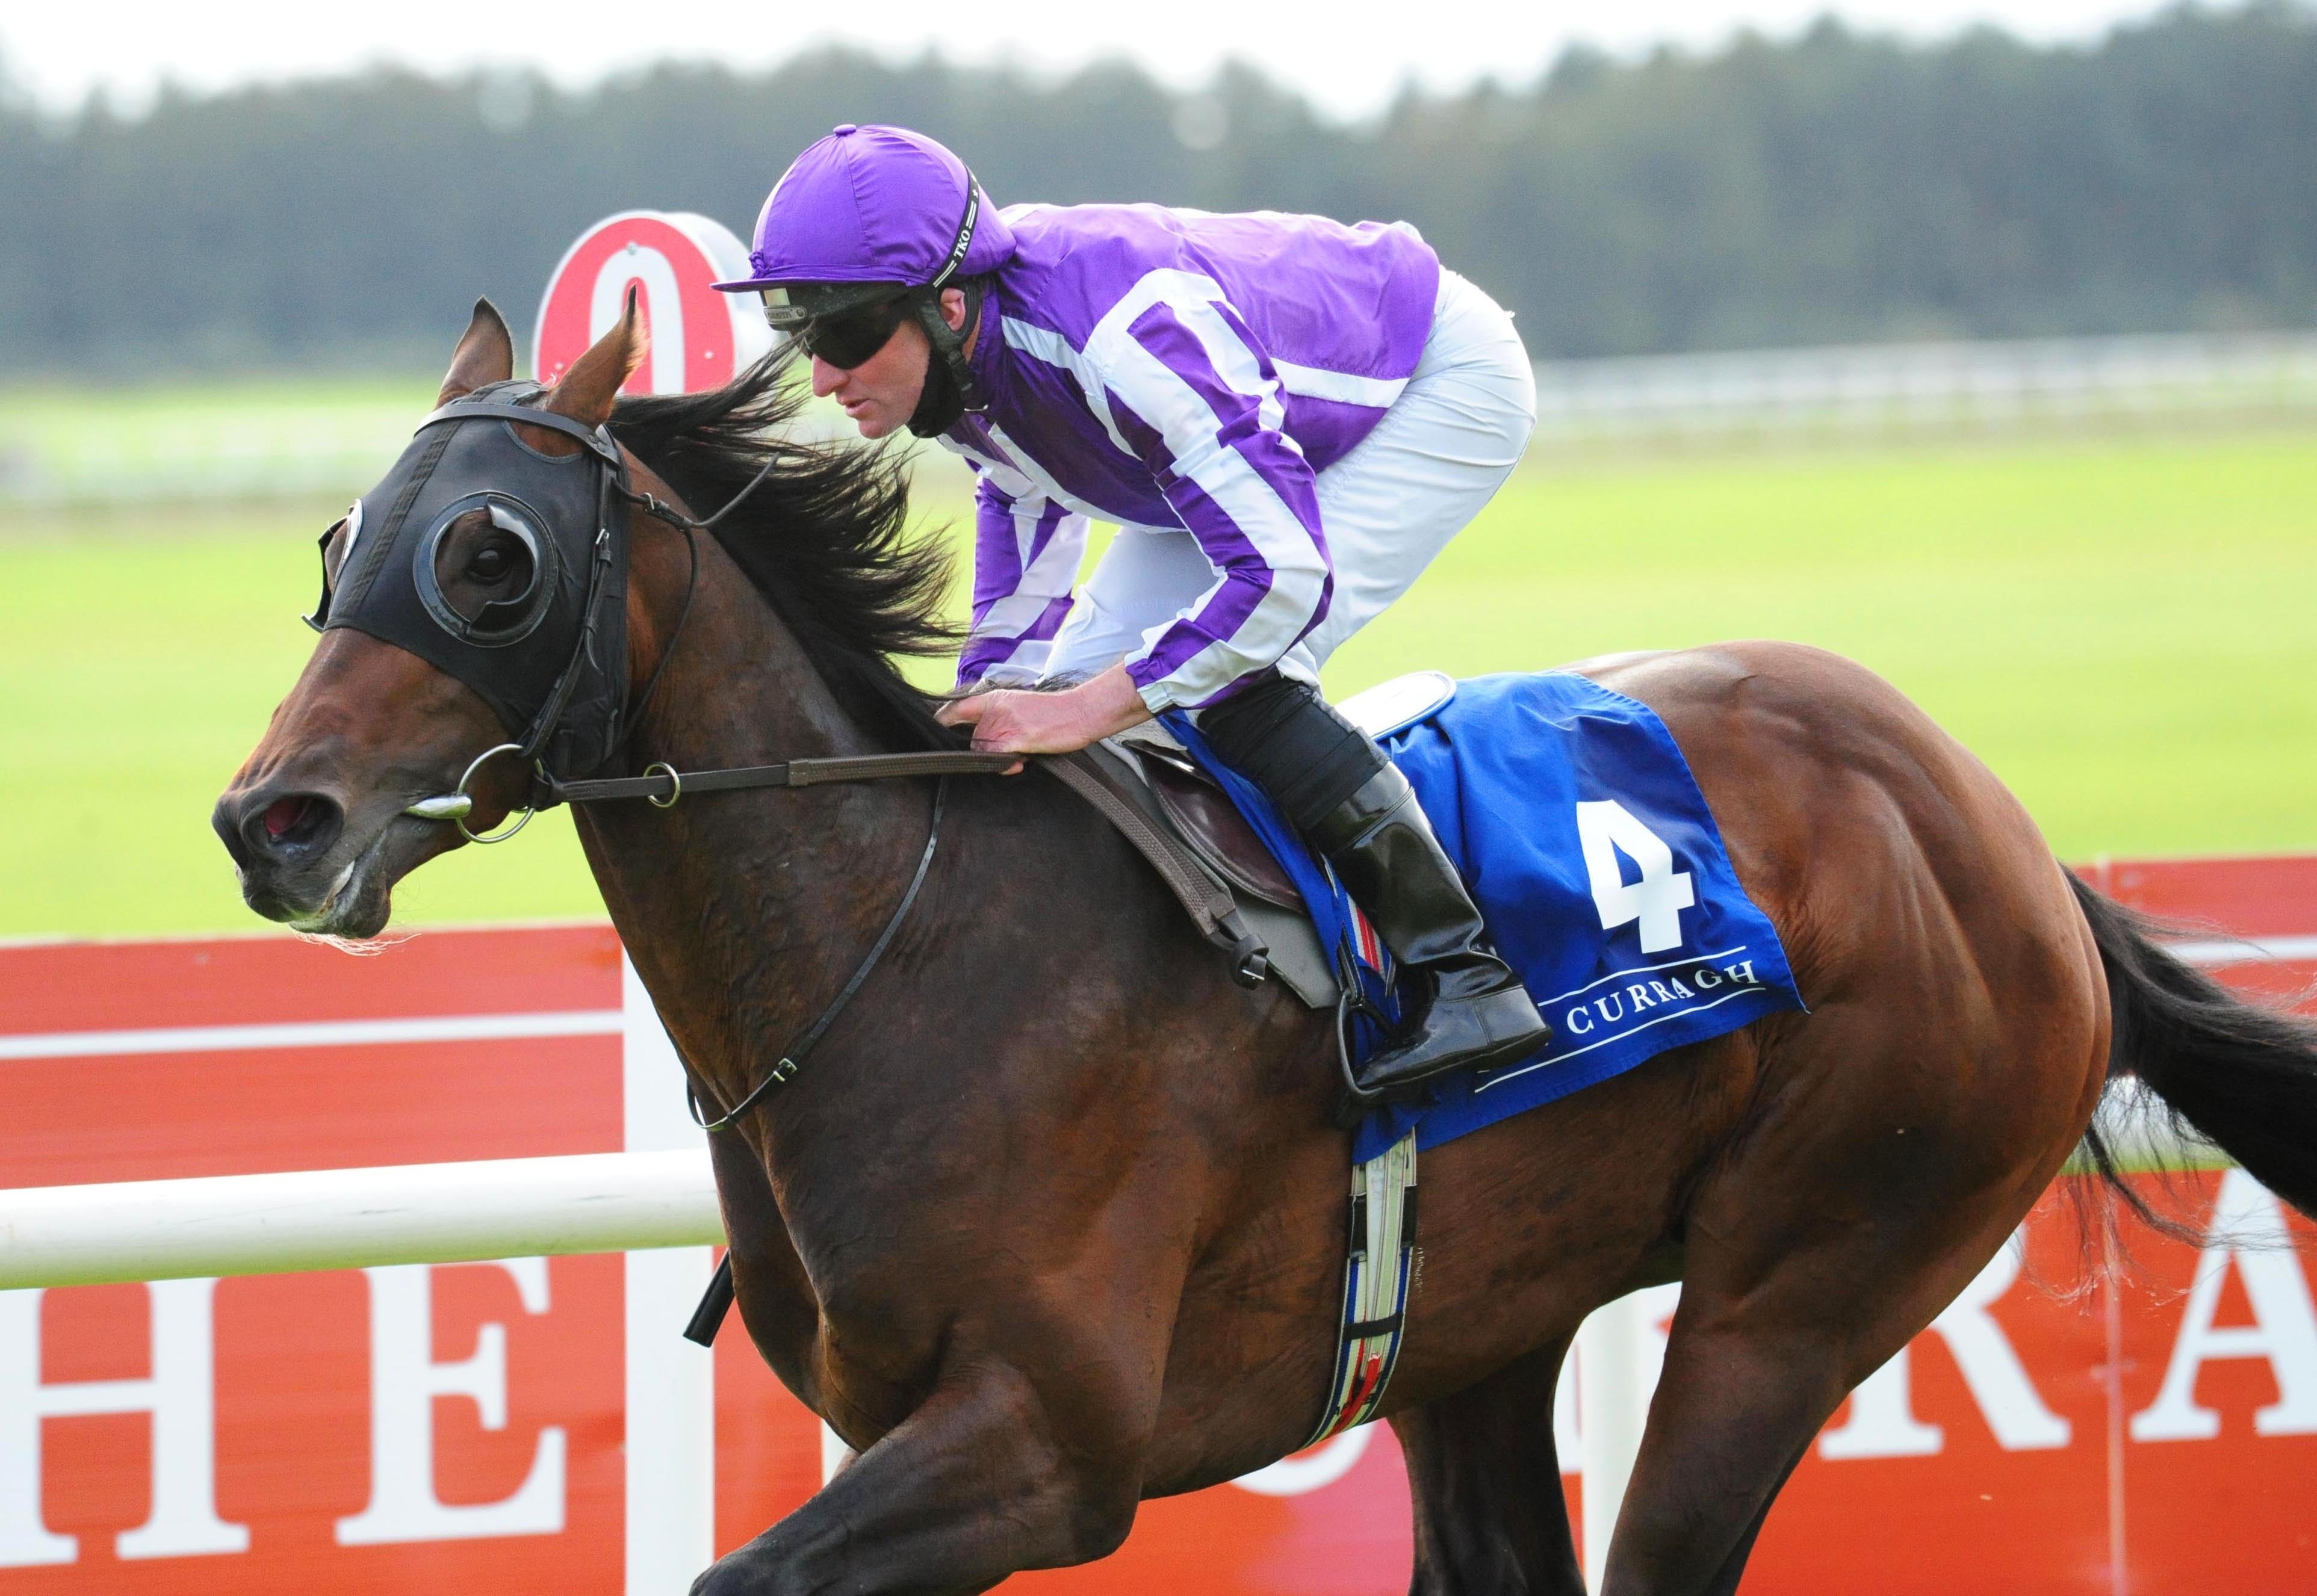 Order Of Australia is one of two runners for Aidan O'Brien